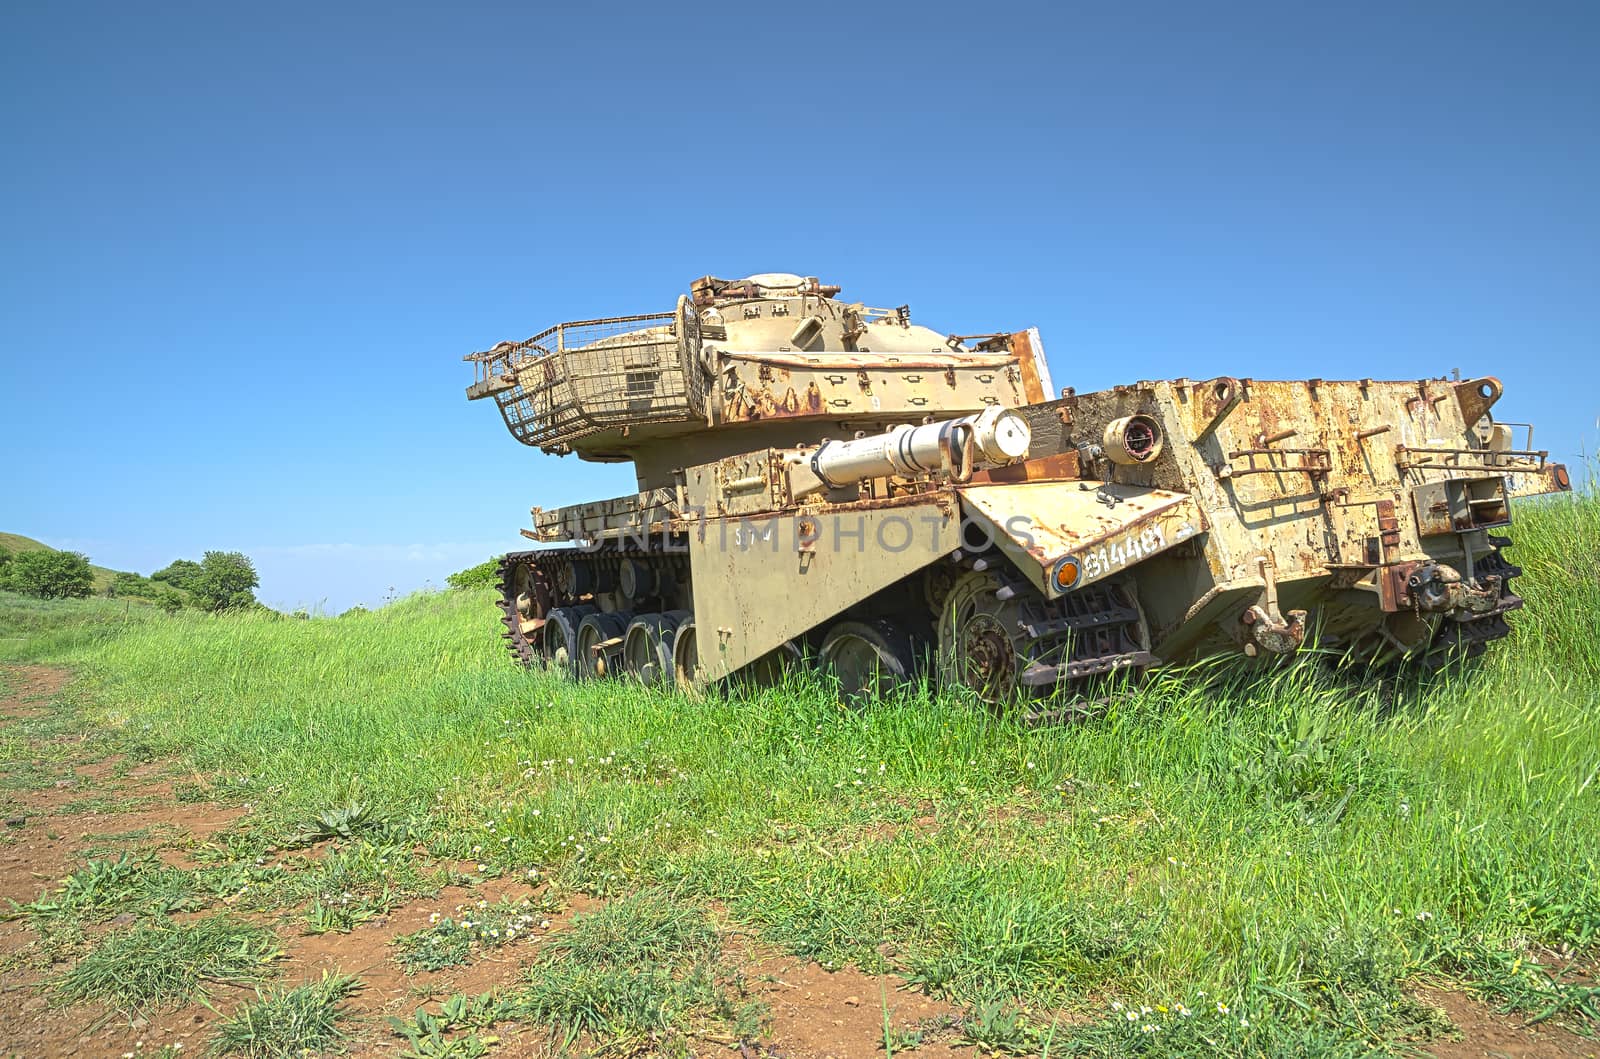 HDR photo of destroyed rusty tank on battlefield emplacement